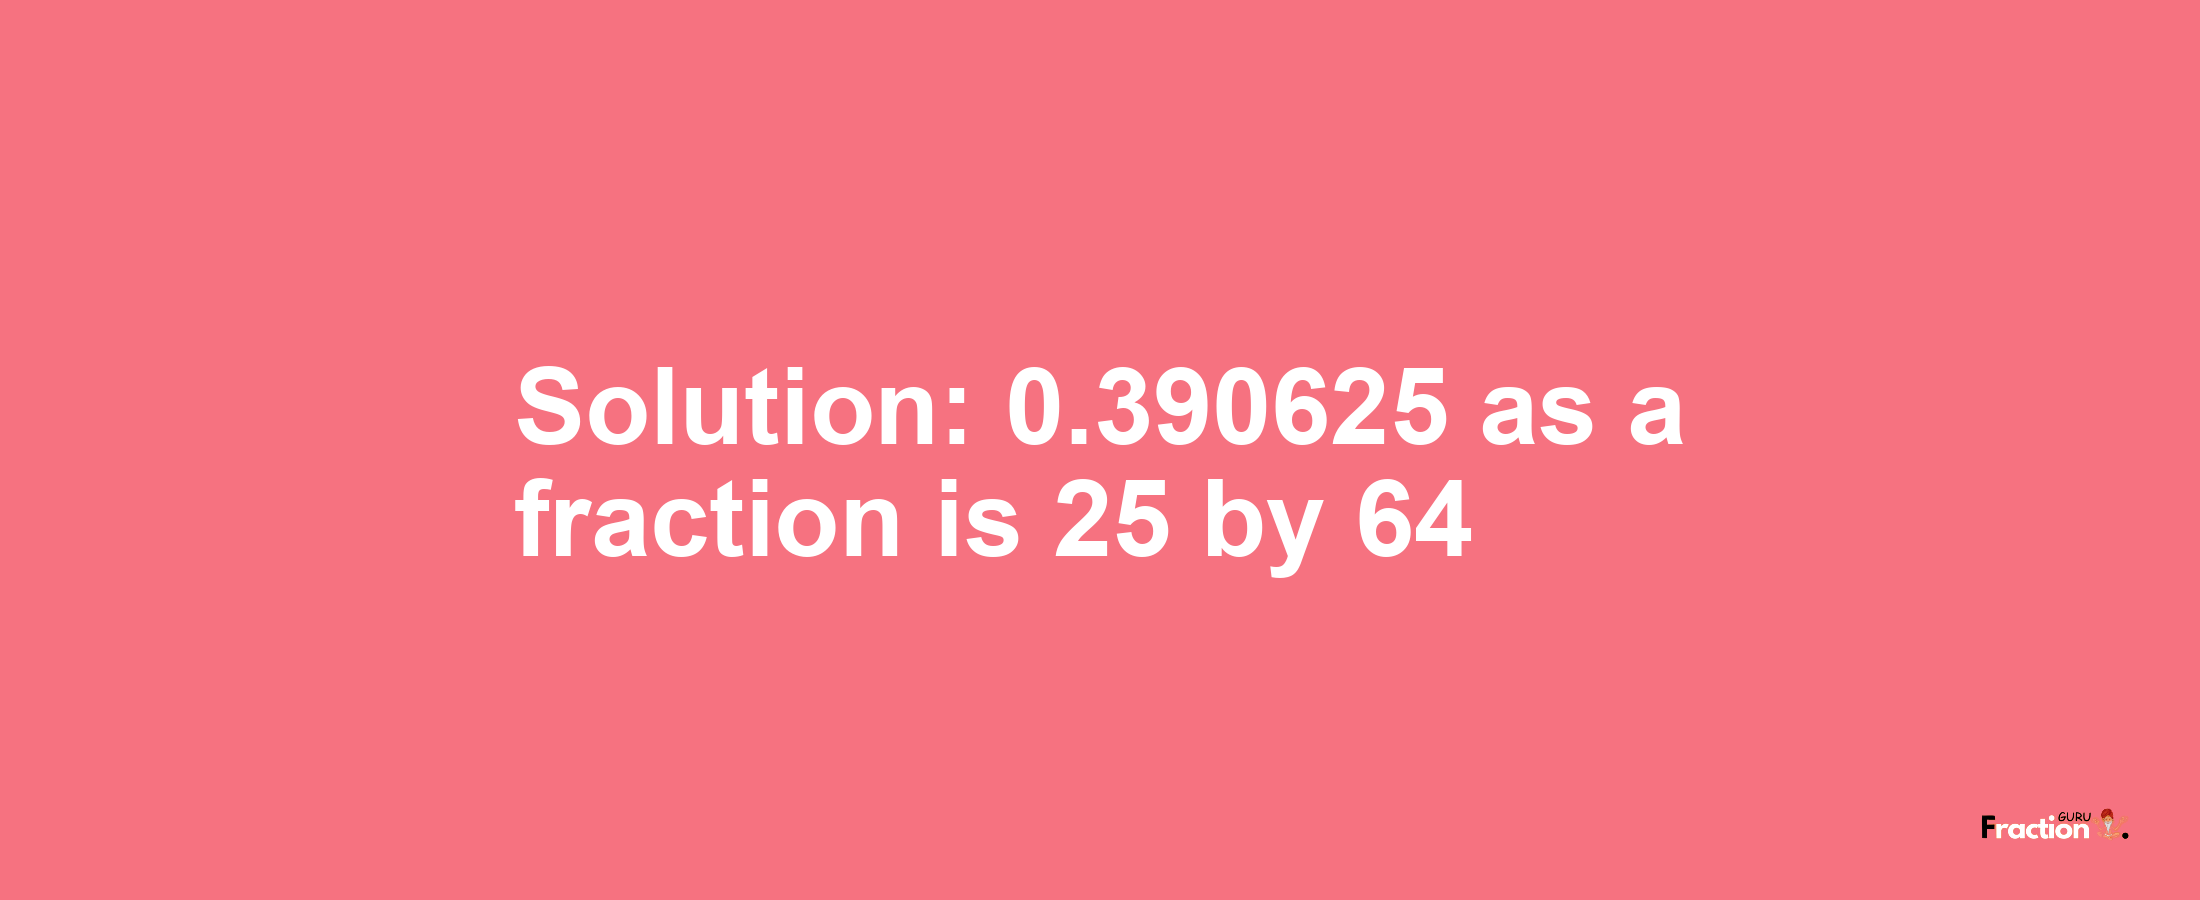 Solution:0.390625 as a fraction is 25/64